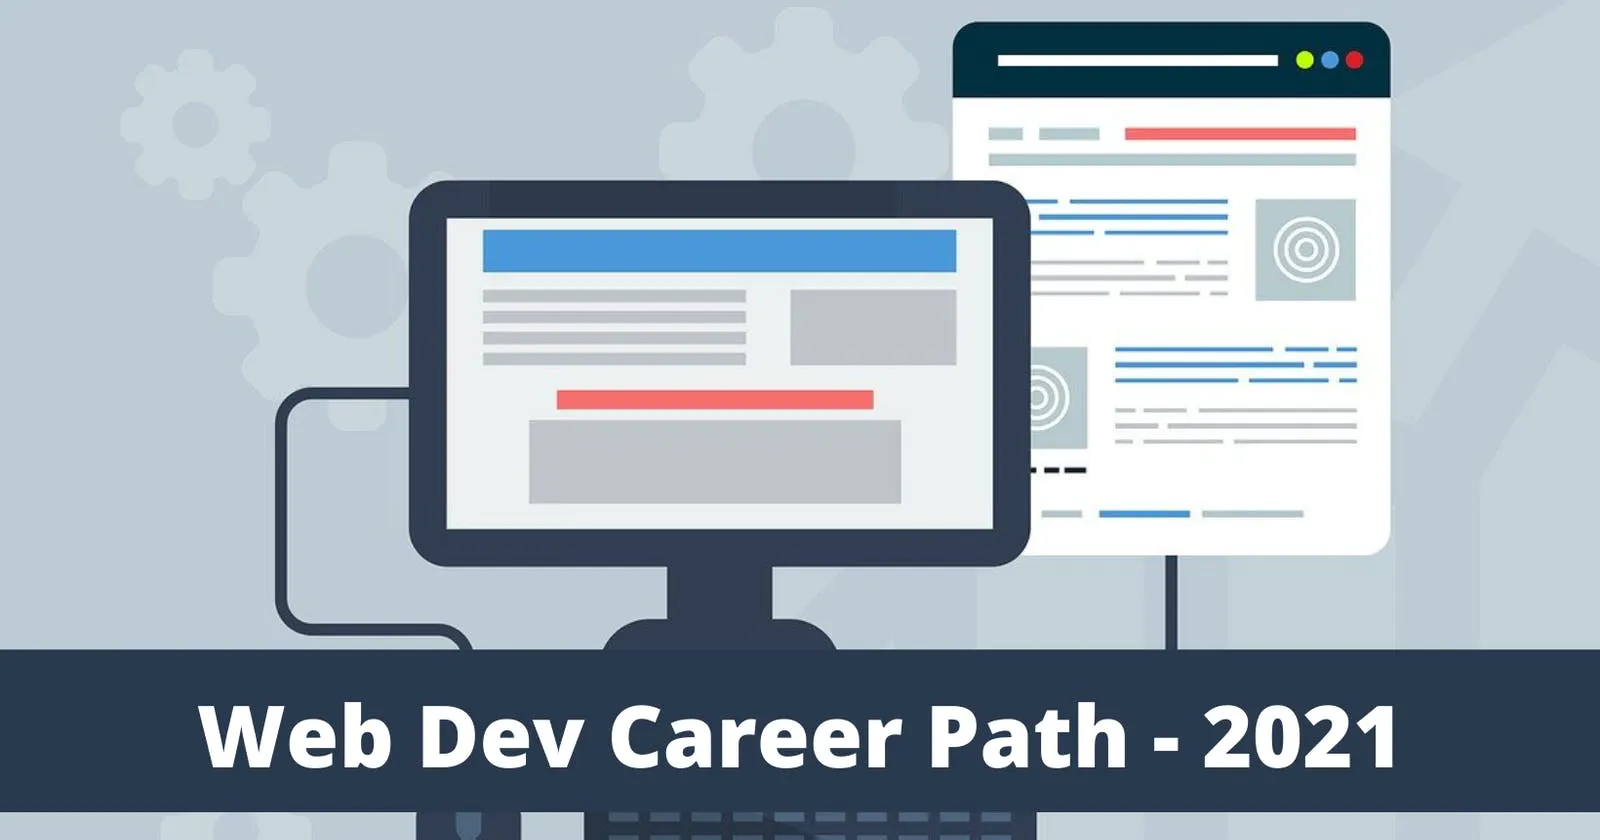 Starting Web Development in 2022: The Complete Guide (with Resources)